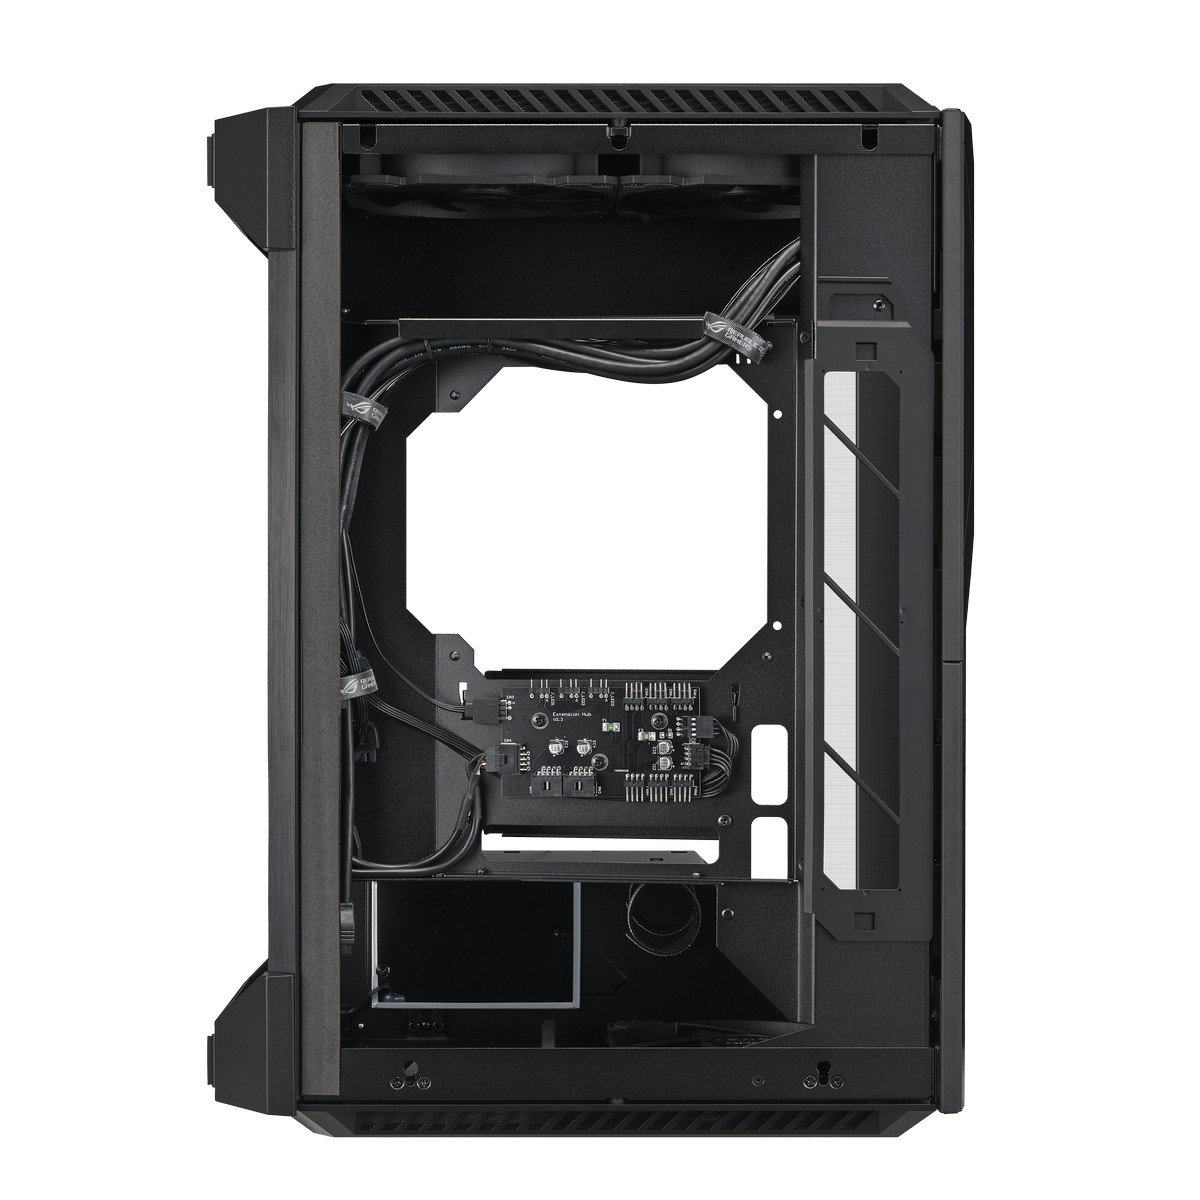 Asus - ASUS ROG Z11 Mini-ITX Gaming case with Tempered Glass